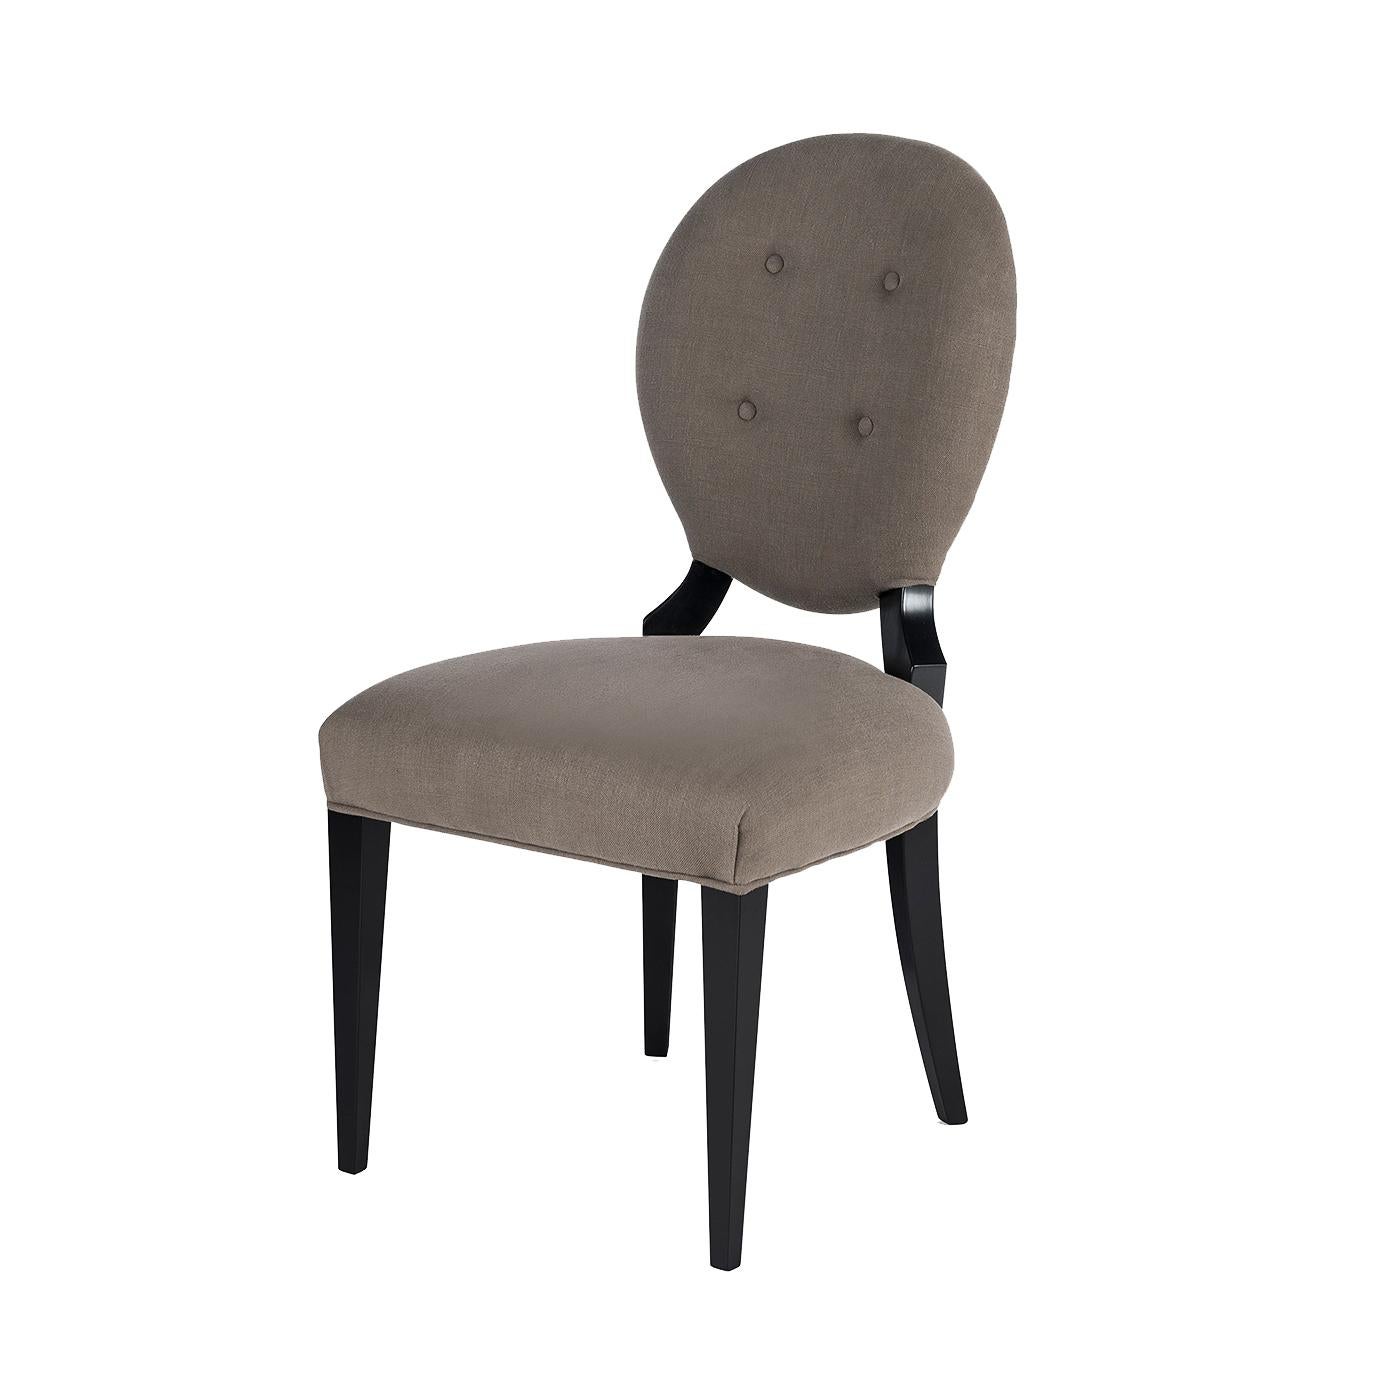 Elegant and sophisticated, these chairs are a modern interpretation of a Classic style and, because of their simple but refined Silhouette, they will complement any decor, whether contemporary or Classic. Their structures is in wood with a matte